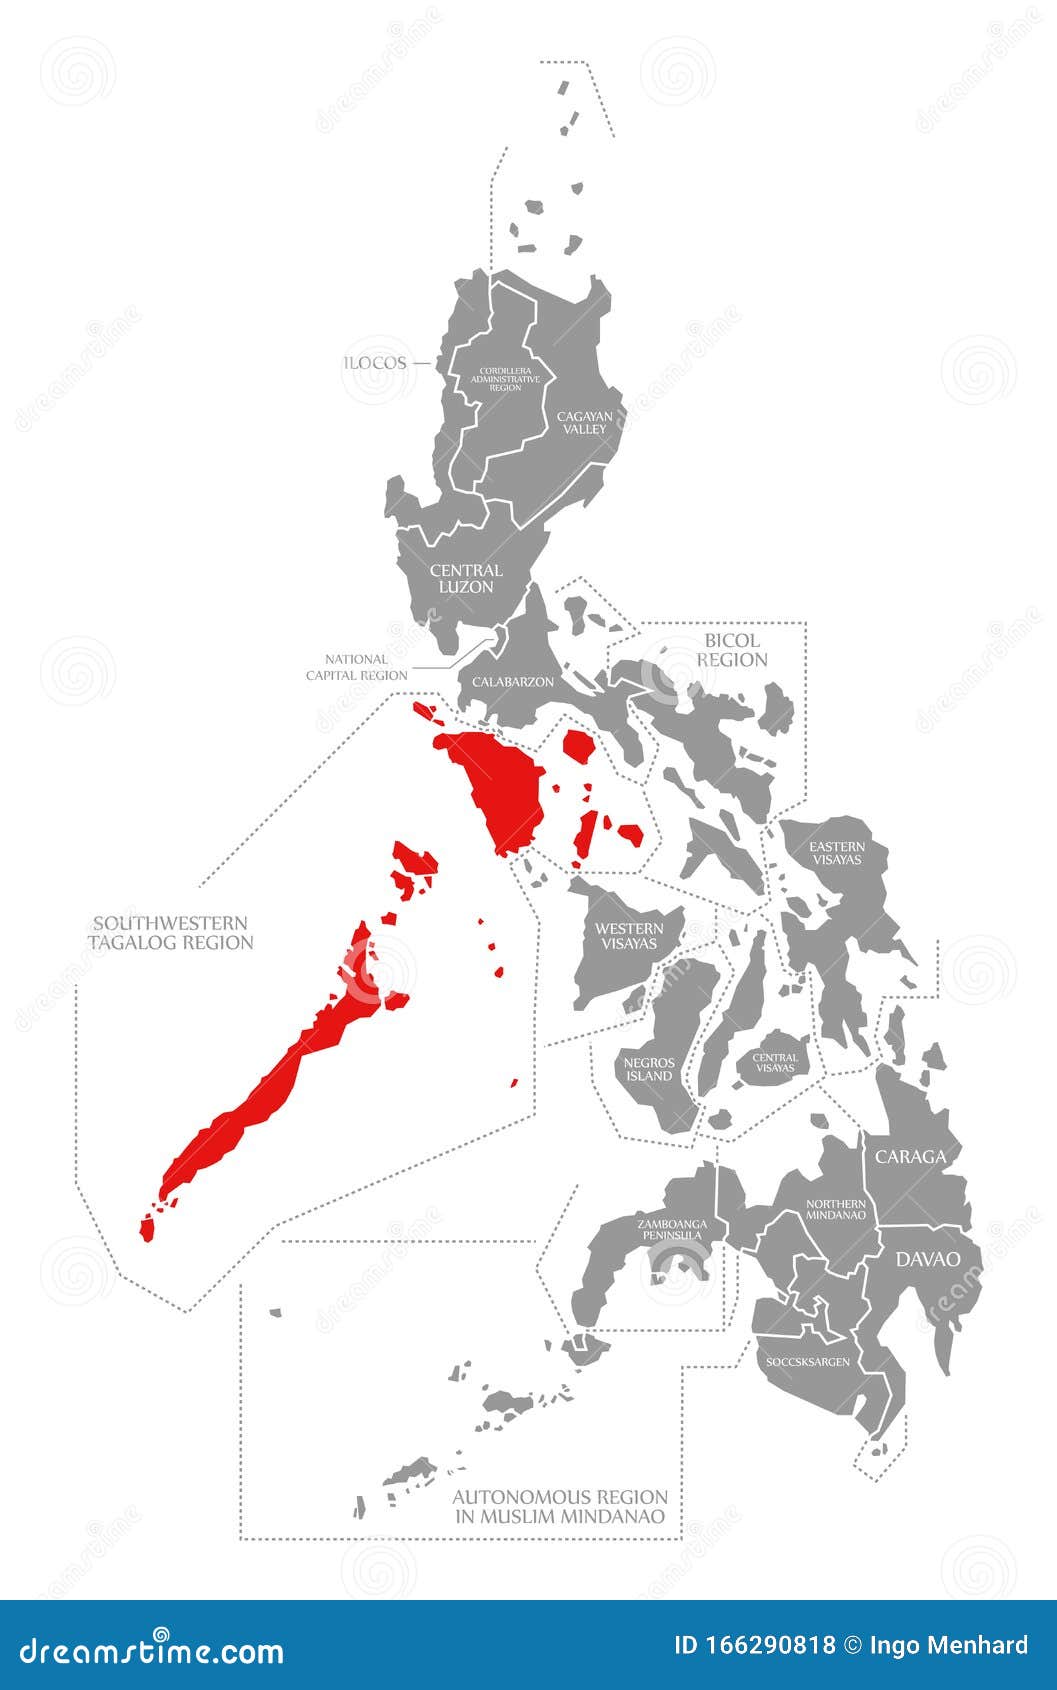 southwestern tagalog region red highlighted in map of philippines